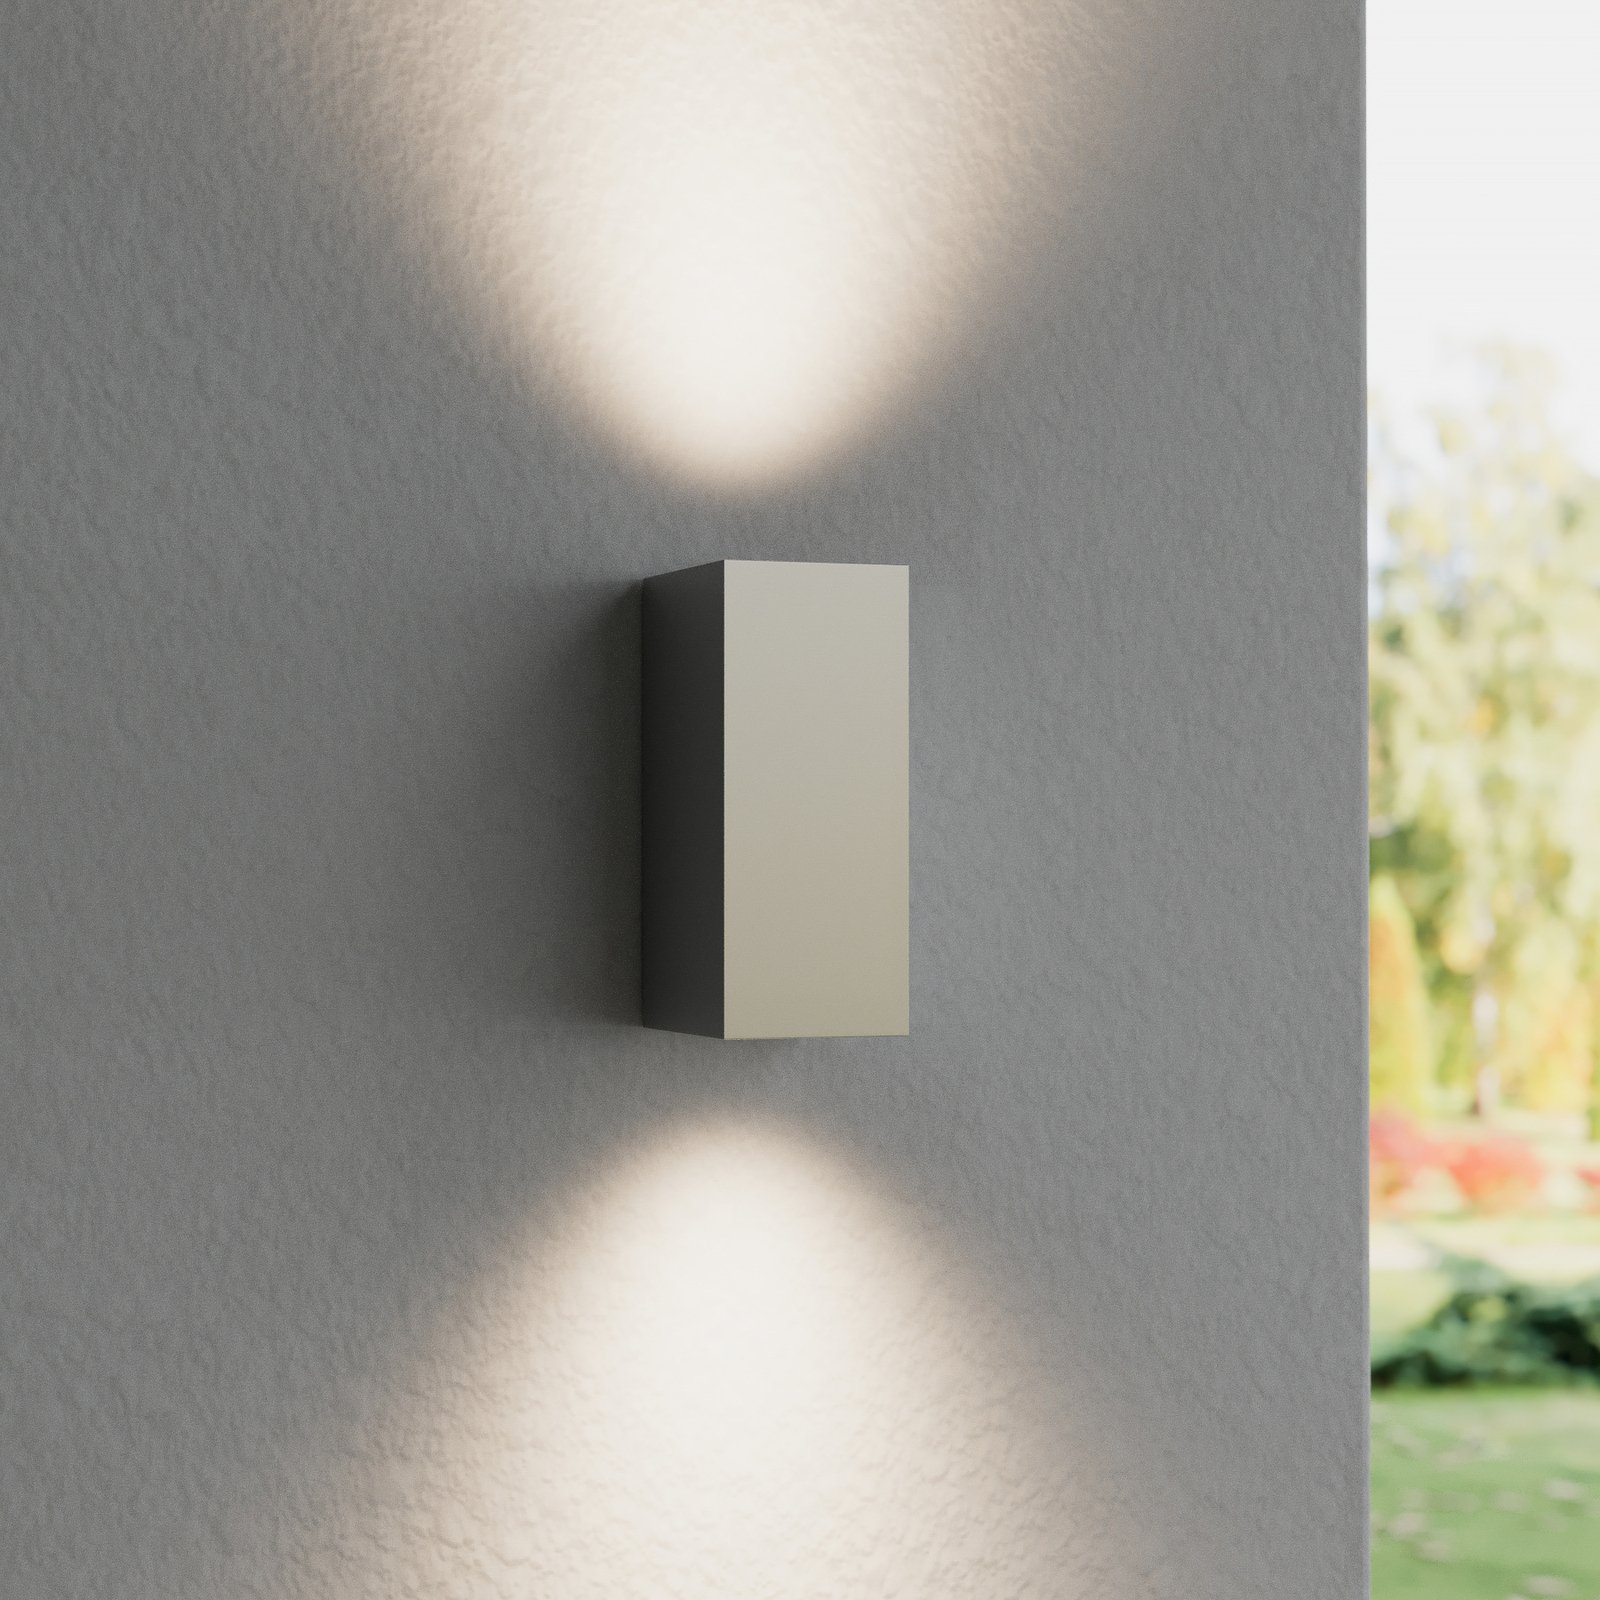 Silver outdoor wall light Tavi with Bridgelux LED